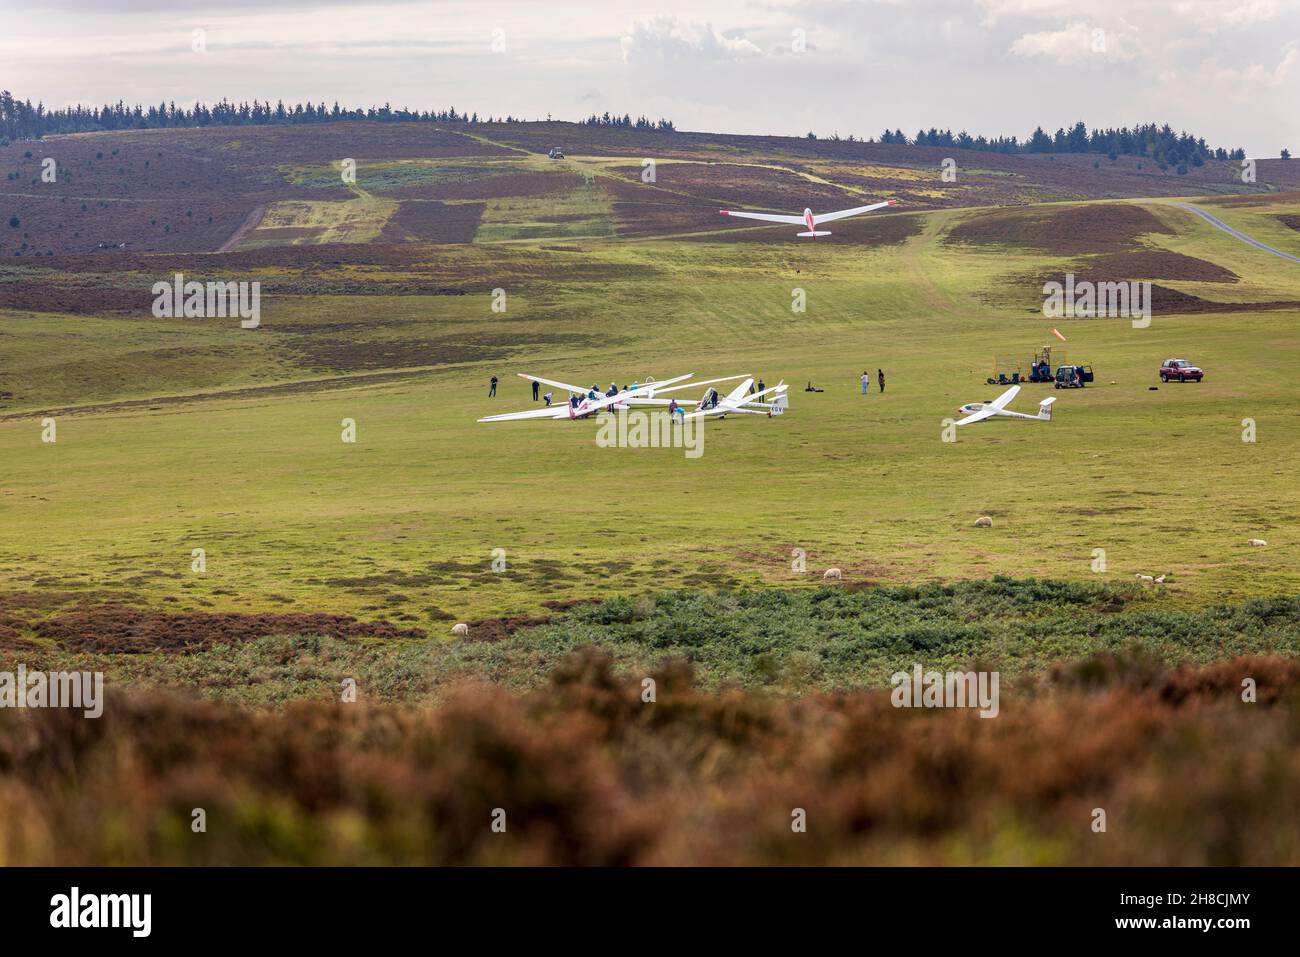 Gliders at the Midland Gliding Club on the Heathland, Long Mynd, Shropshire Hills, area of natural beauty, England Stock Photo